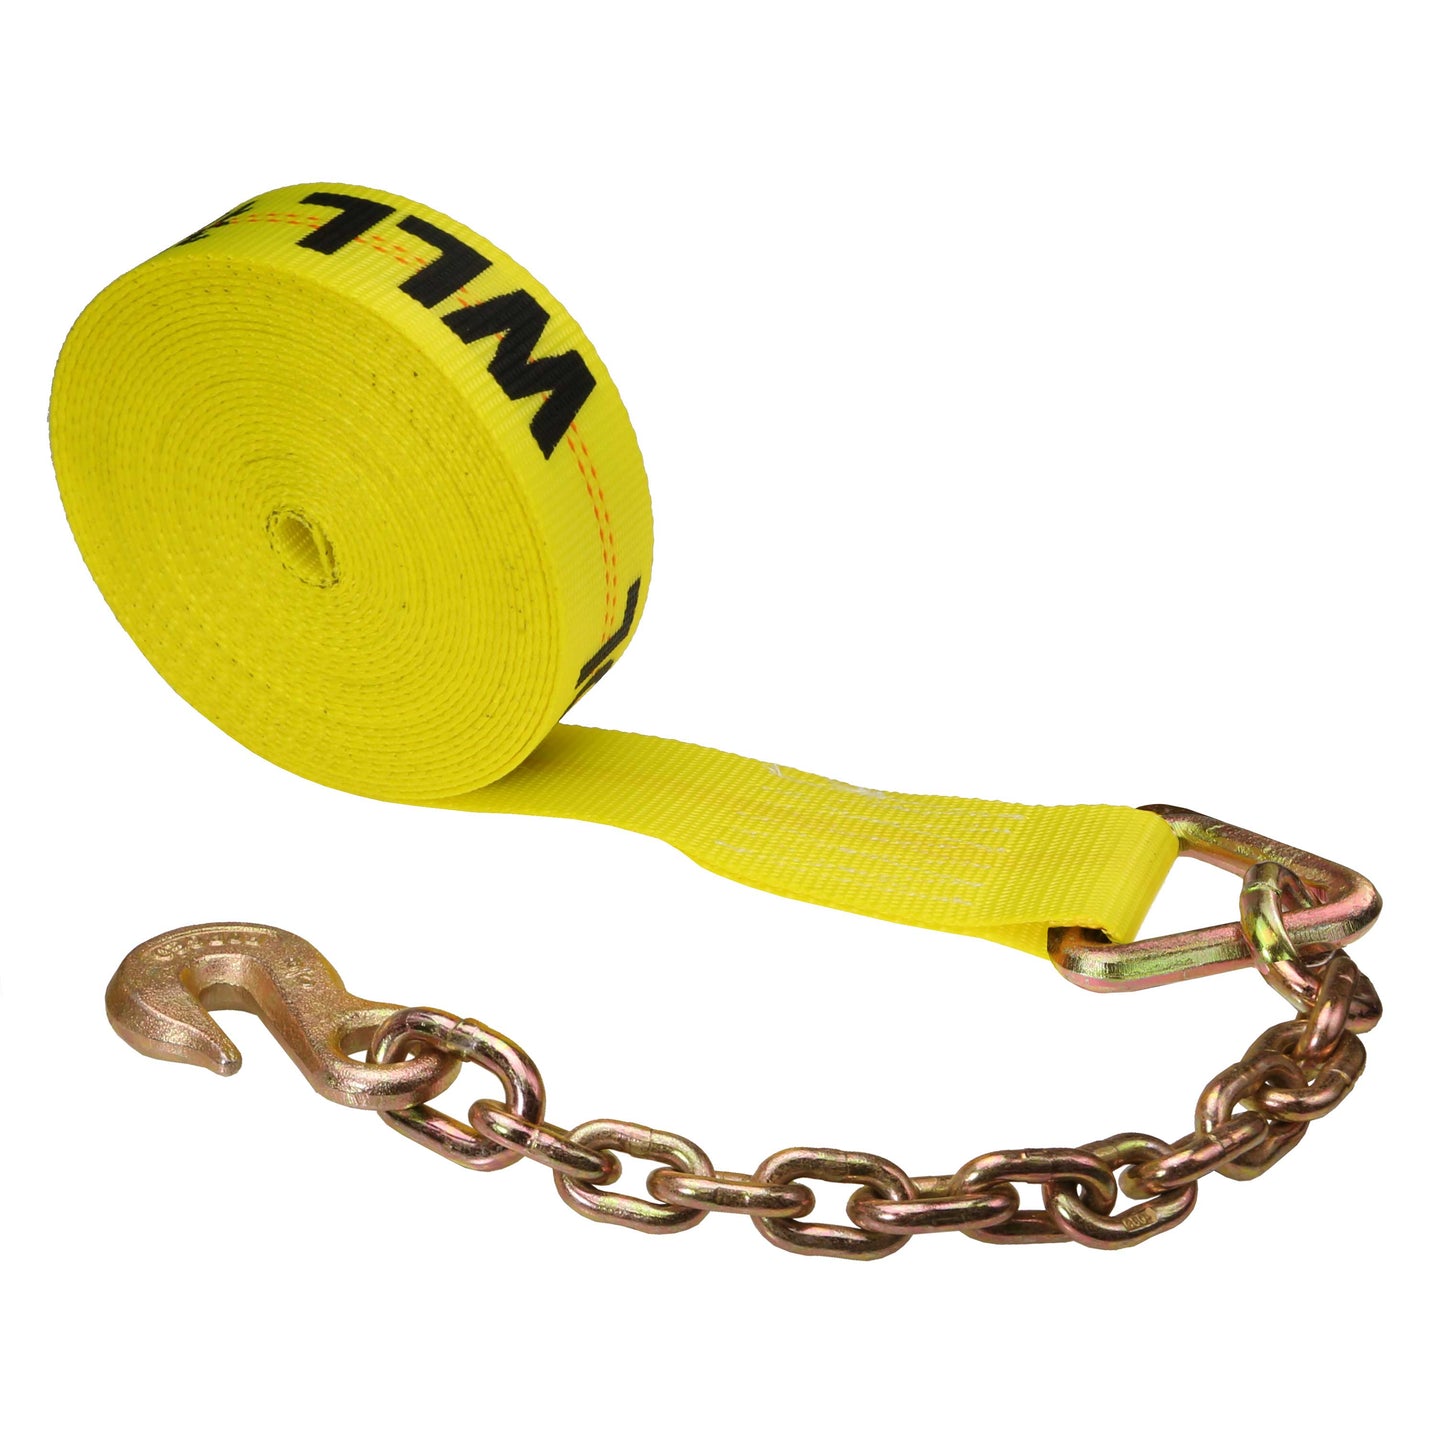 2 inch x 30 foot Winch Strap with Chain Extension